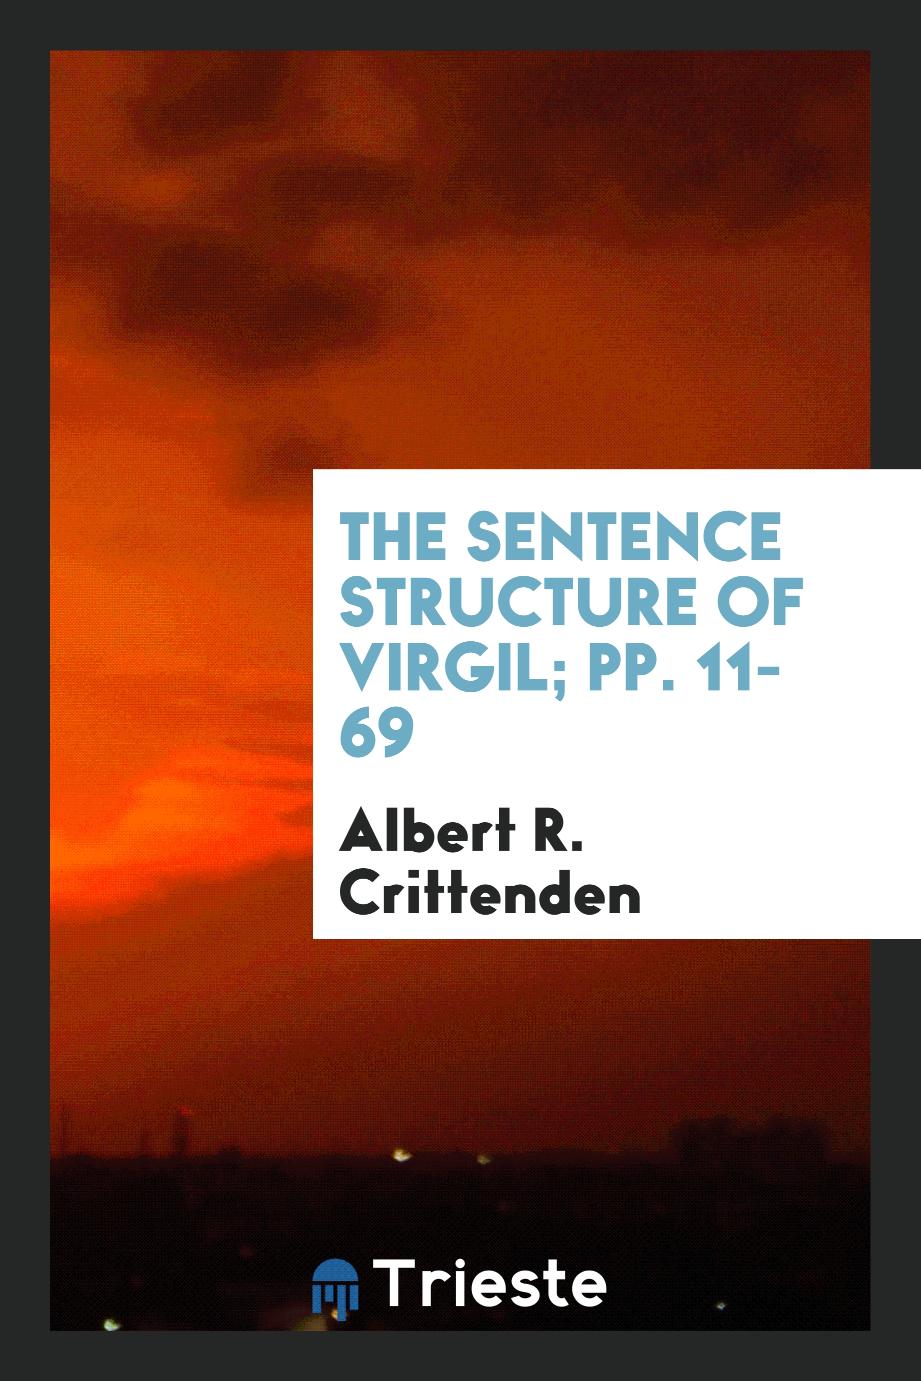 The Sentence Structure of Virgil; pp. 11-69